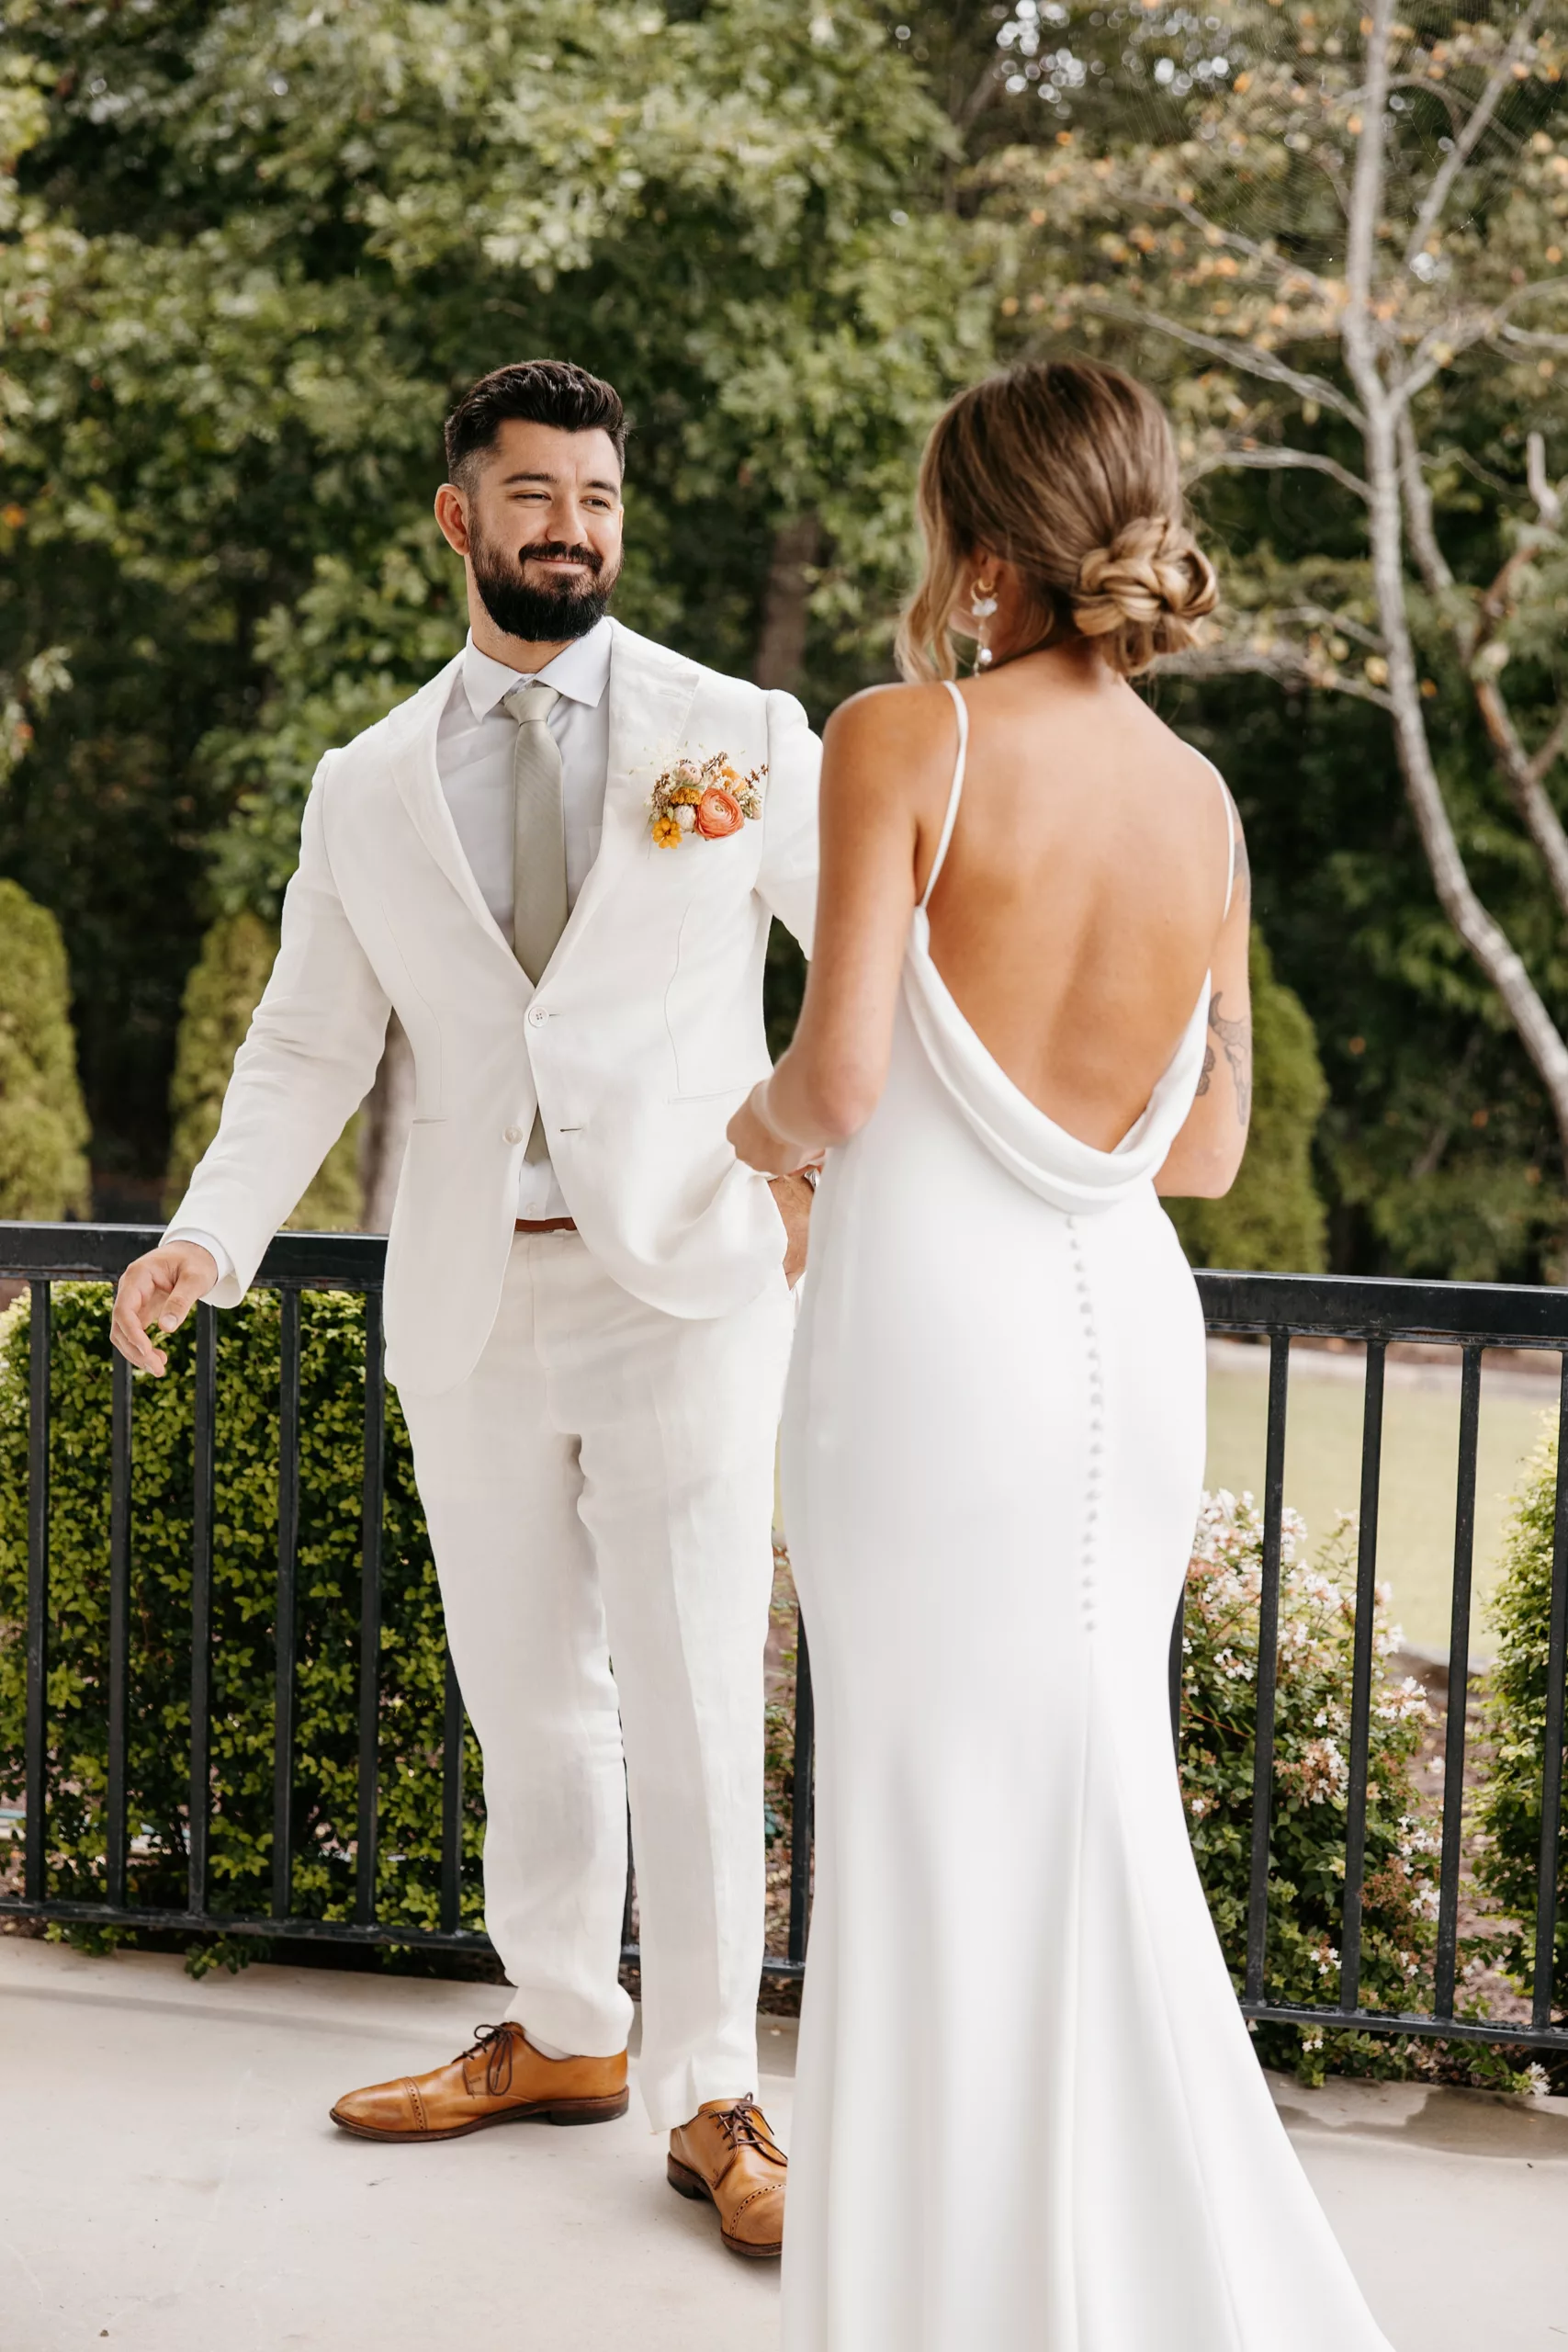 A groom smiles big as he turns around to see his bride for the first time as he wears a white suit